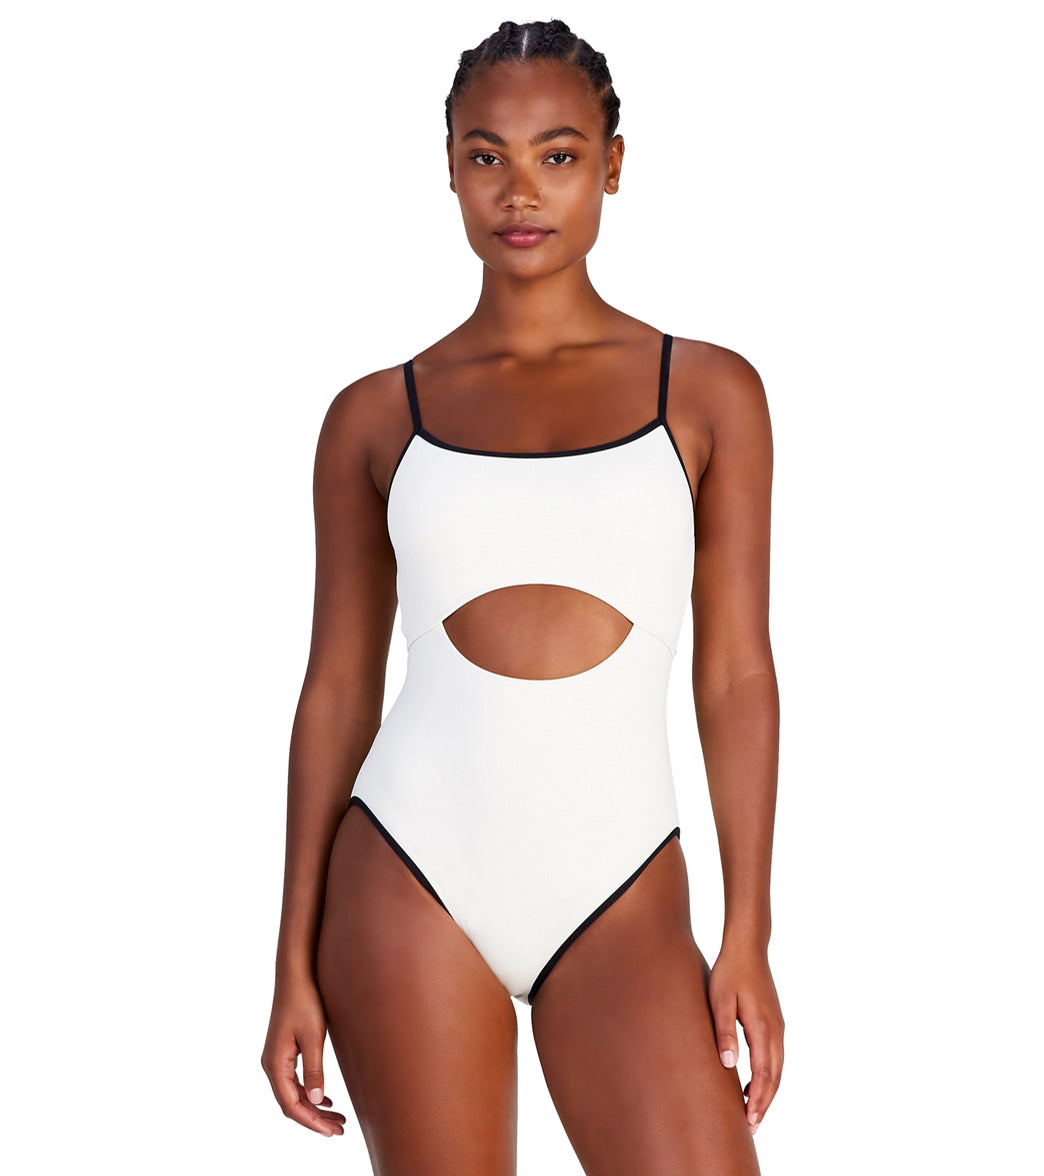 Kate Spade New York Womens Contrast Solidss Cut Out One Piece Swimsuit